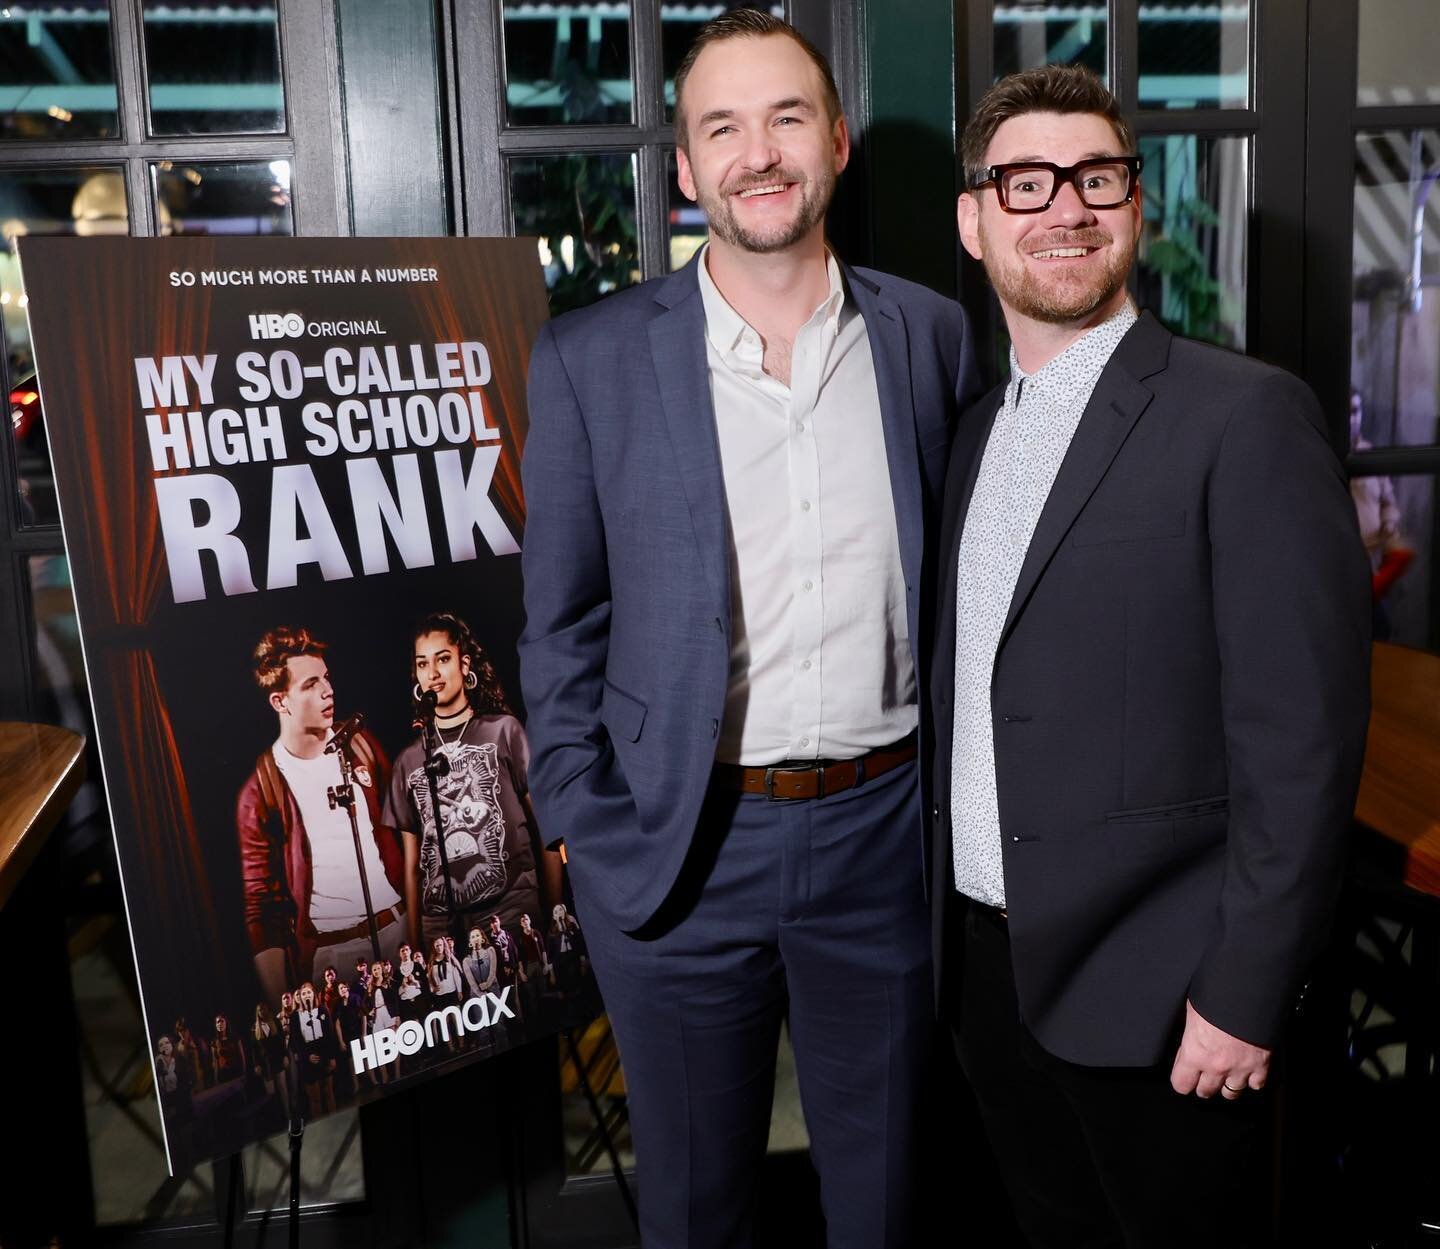 Hello, New York City!
We are so excited to share My So-Called High School Rank with everyone, streaming on @HBOMax on November 29.

So appreciative of everyone who has believed in our story, especially film directors @rickibreakthrufilms and @acsundb